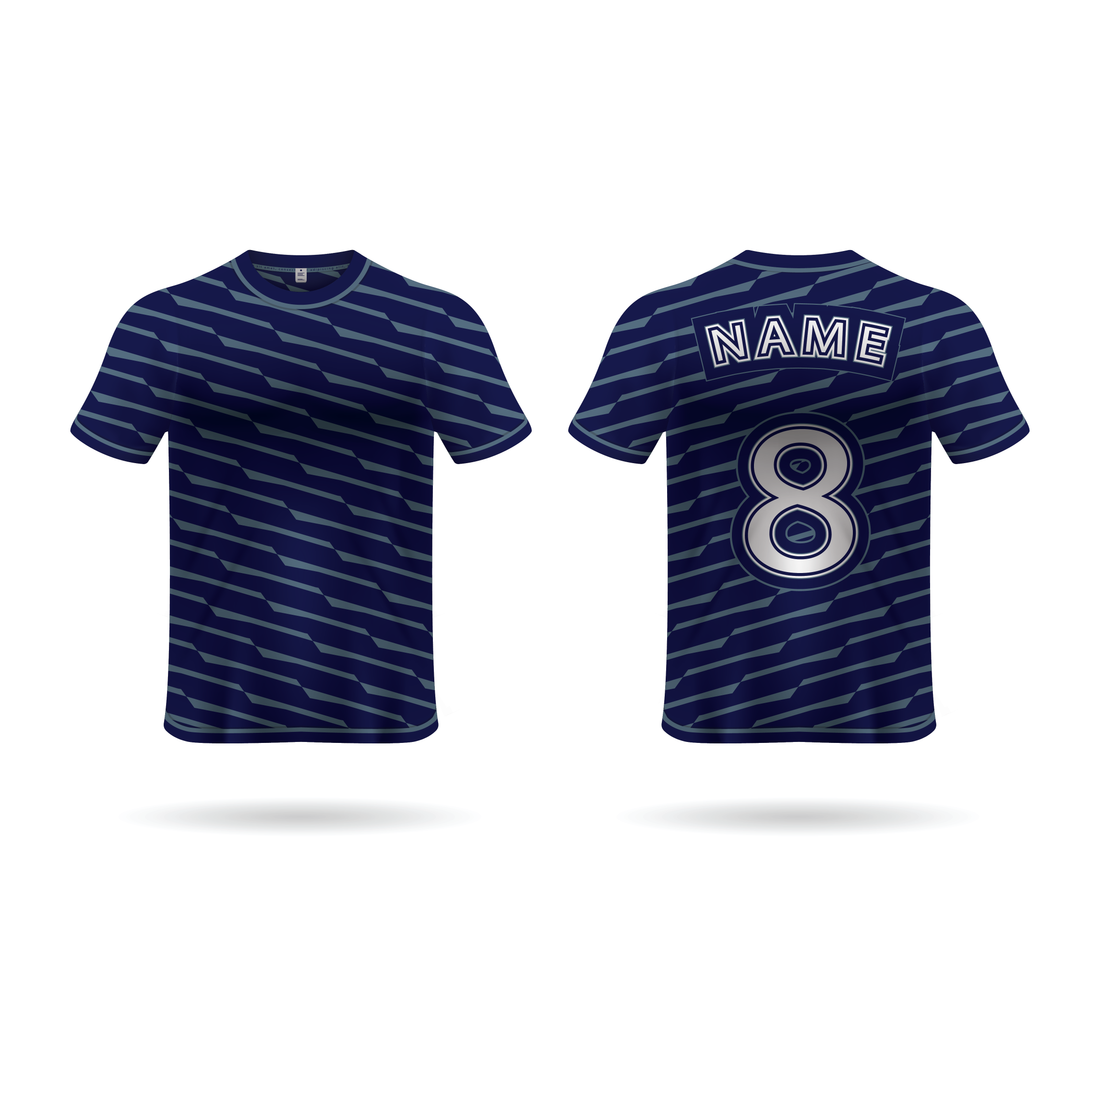 NEXT PRINT All Over Printed Customized Sublimation T-Shirt Unisex Sports Jersey Player Name & Number, Team Name NP50000247